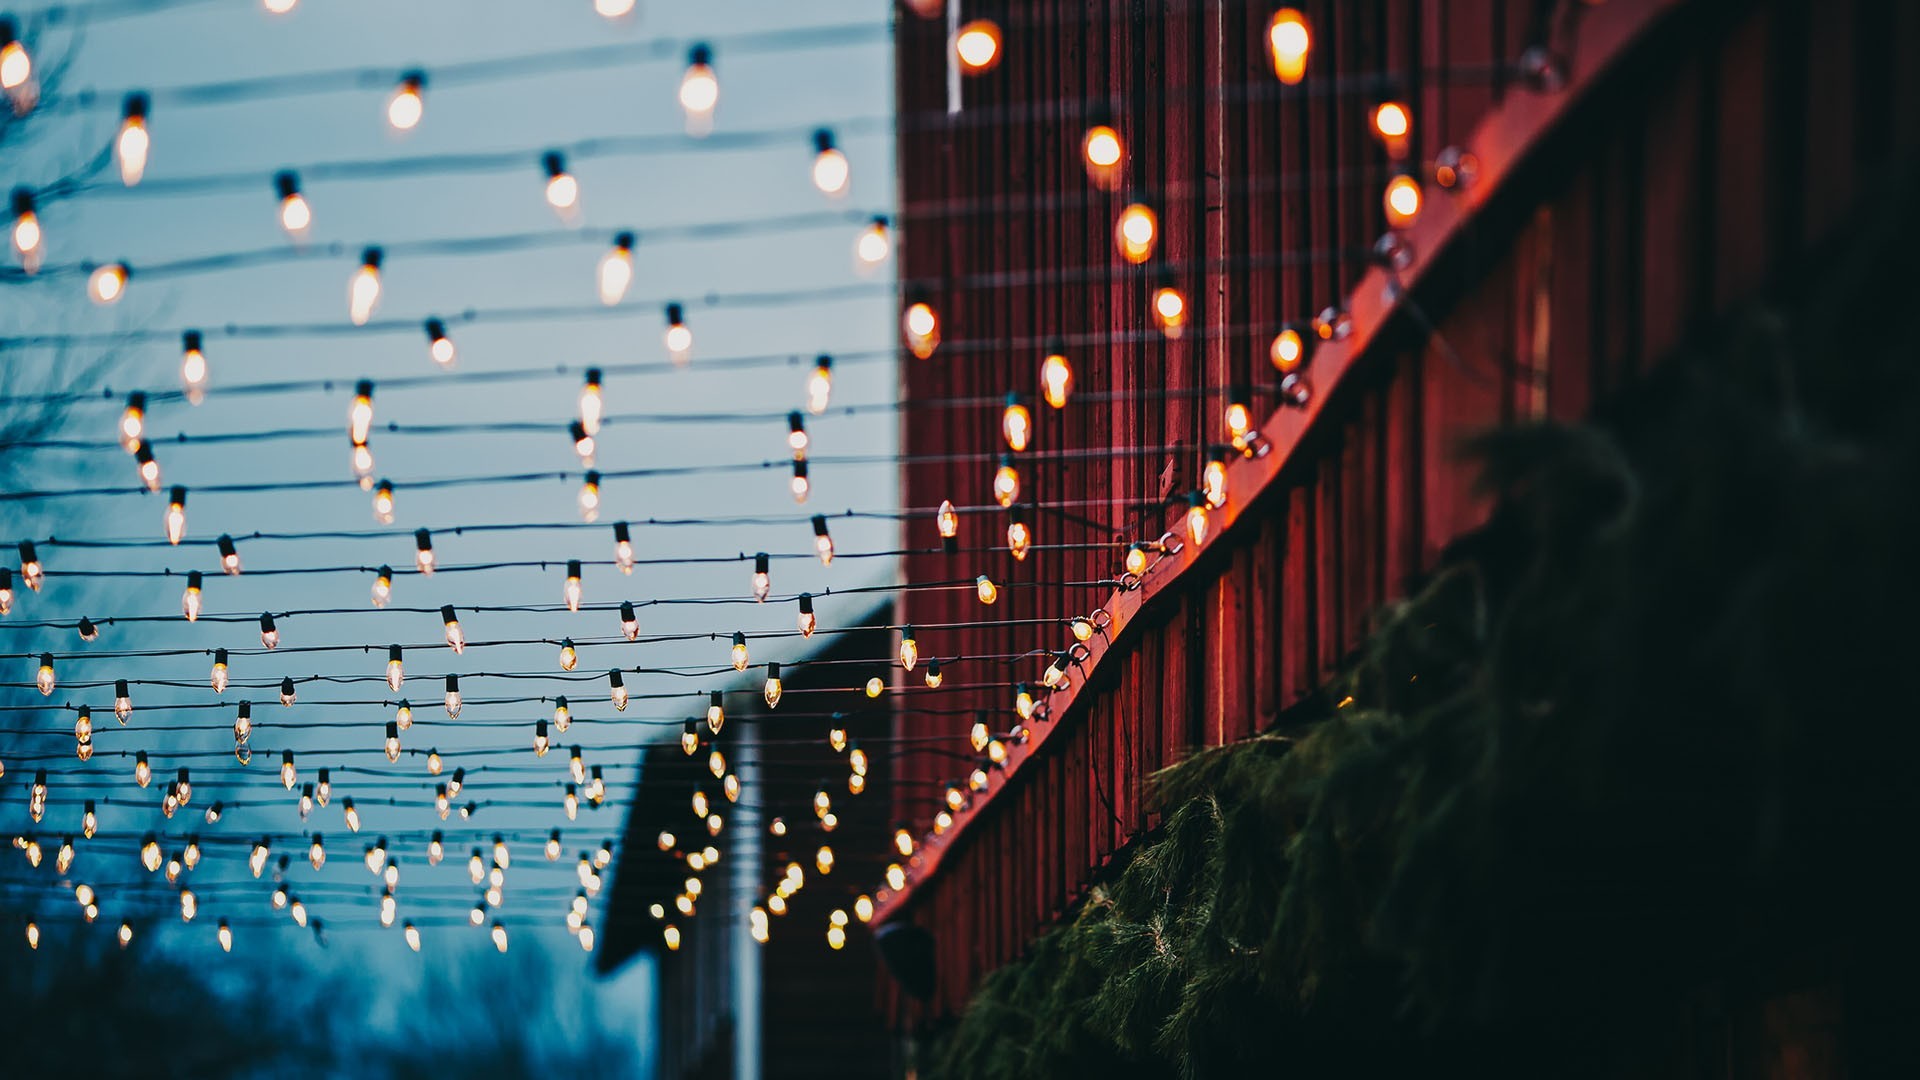 General 1920x1080 lights Christmas lights bokeh wires plants building lamp red atmosphere evening